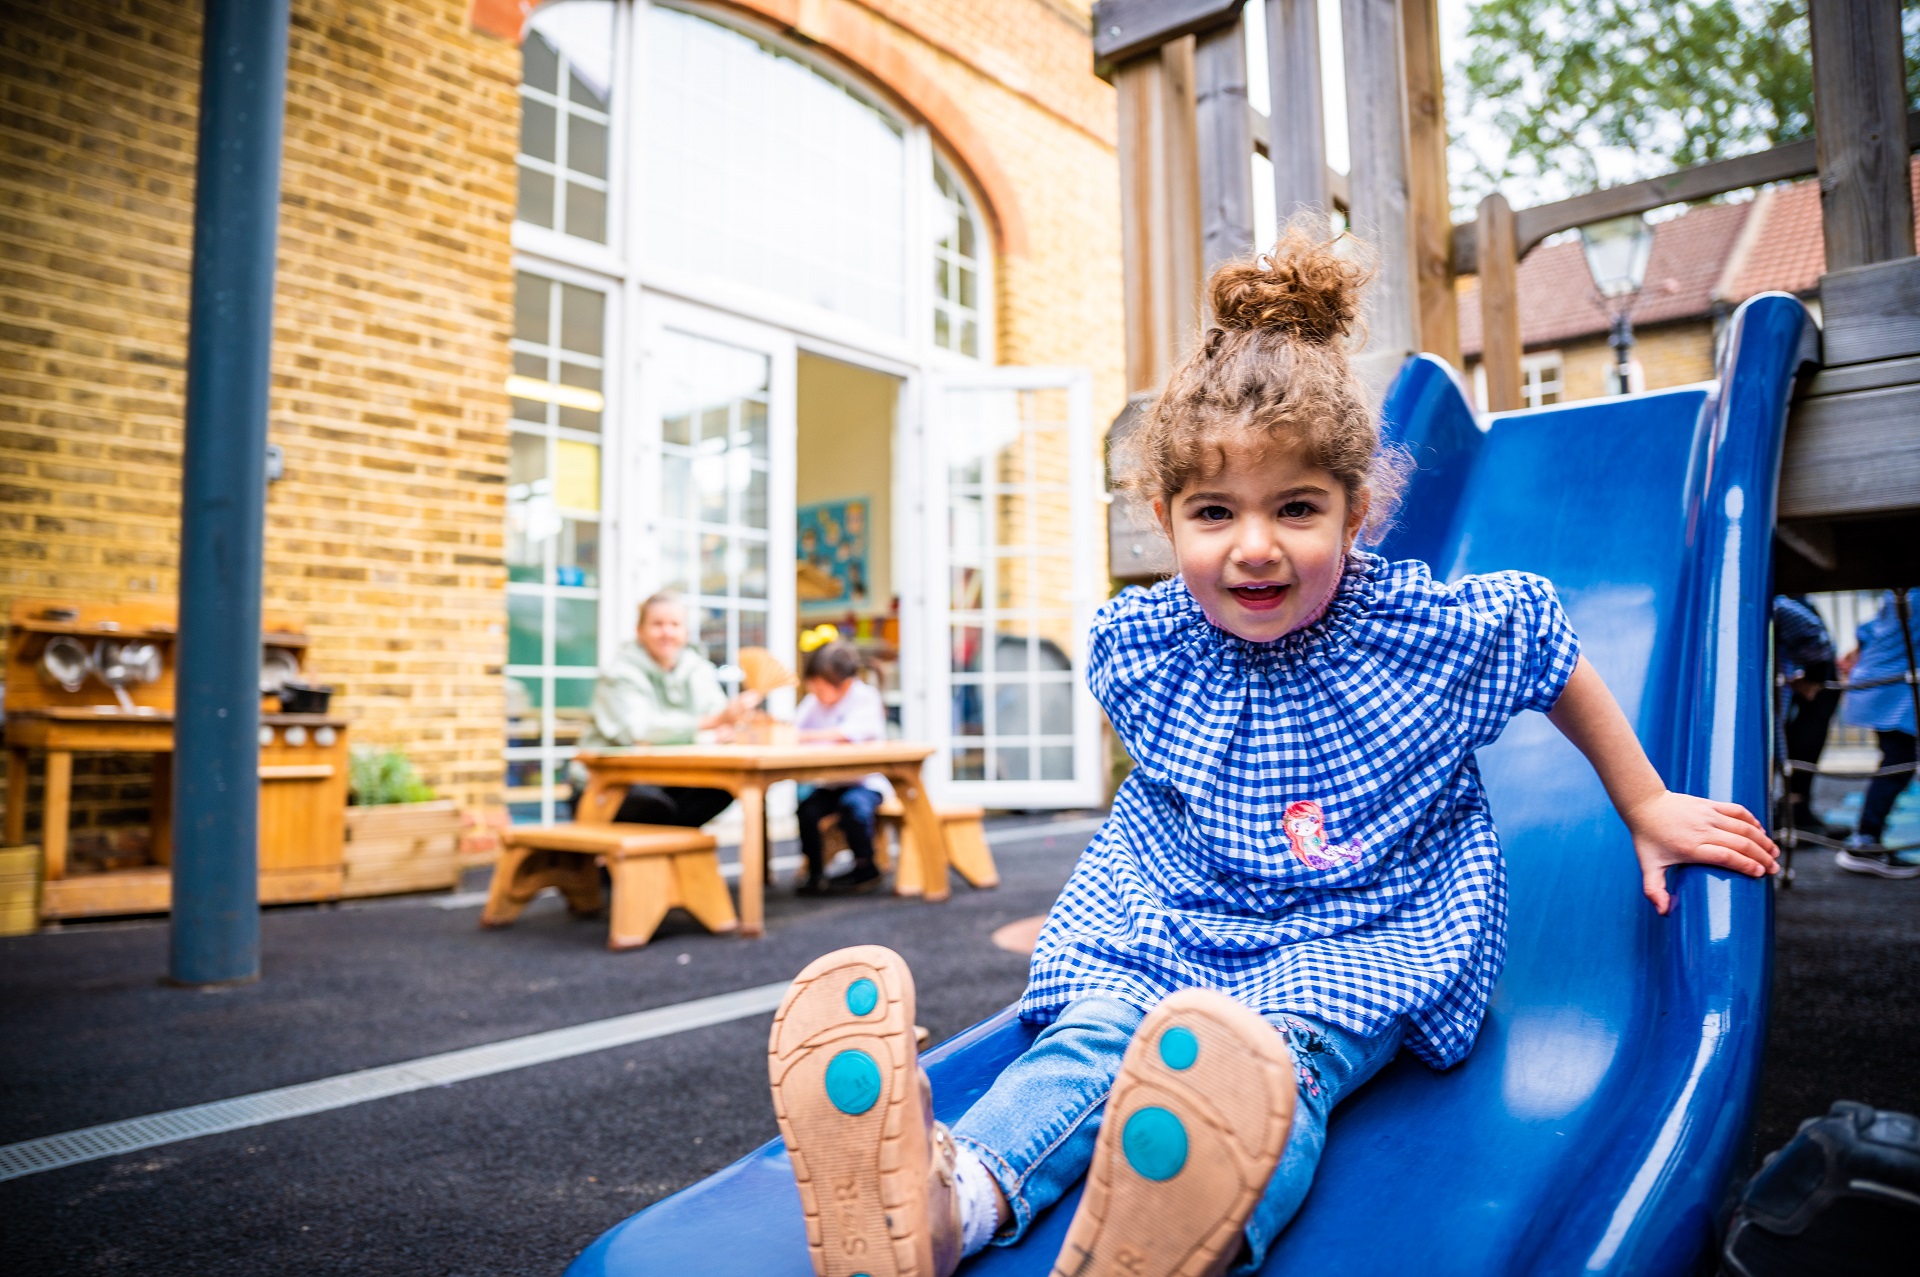 A Nursery pupil slides down a blue slide in the playground.